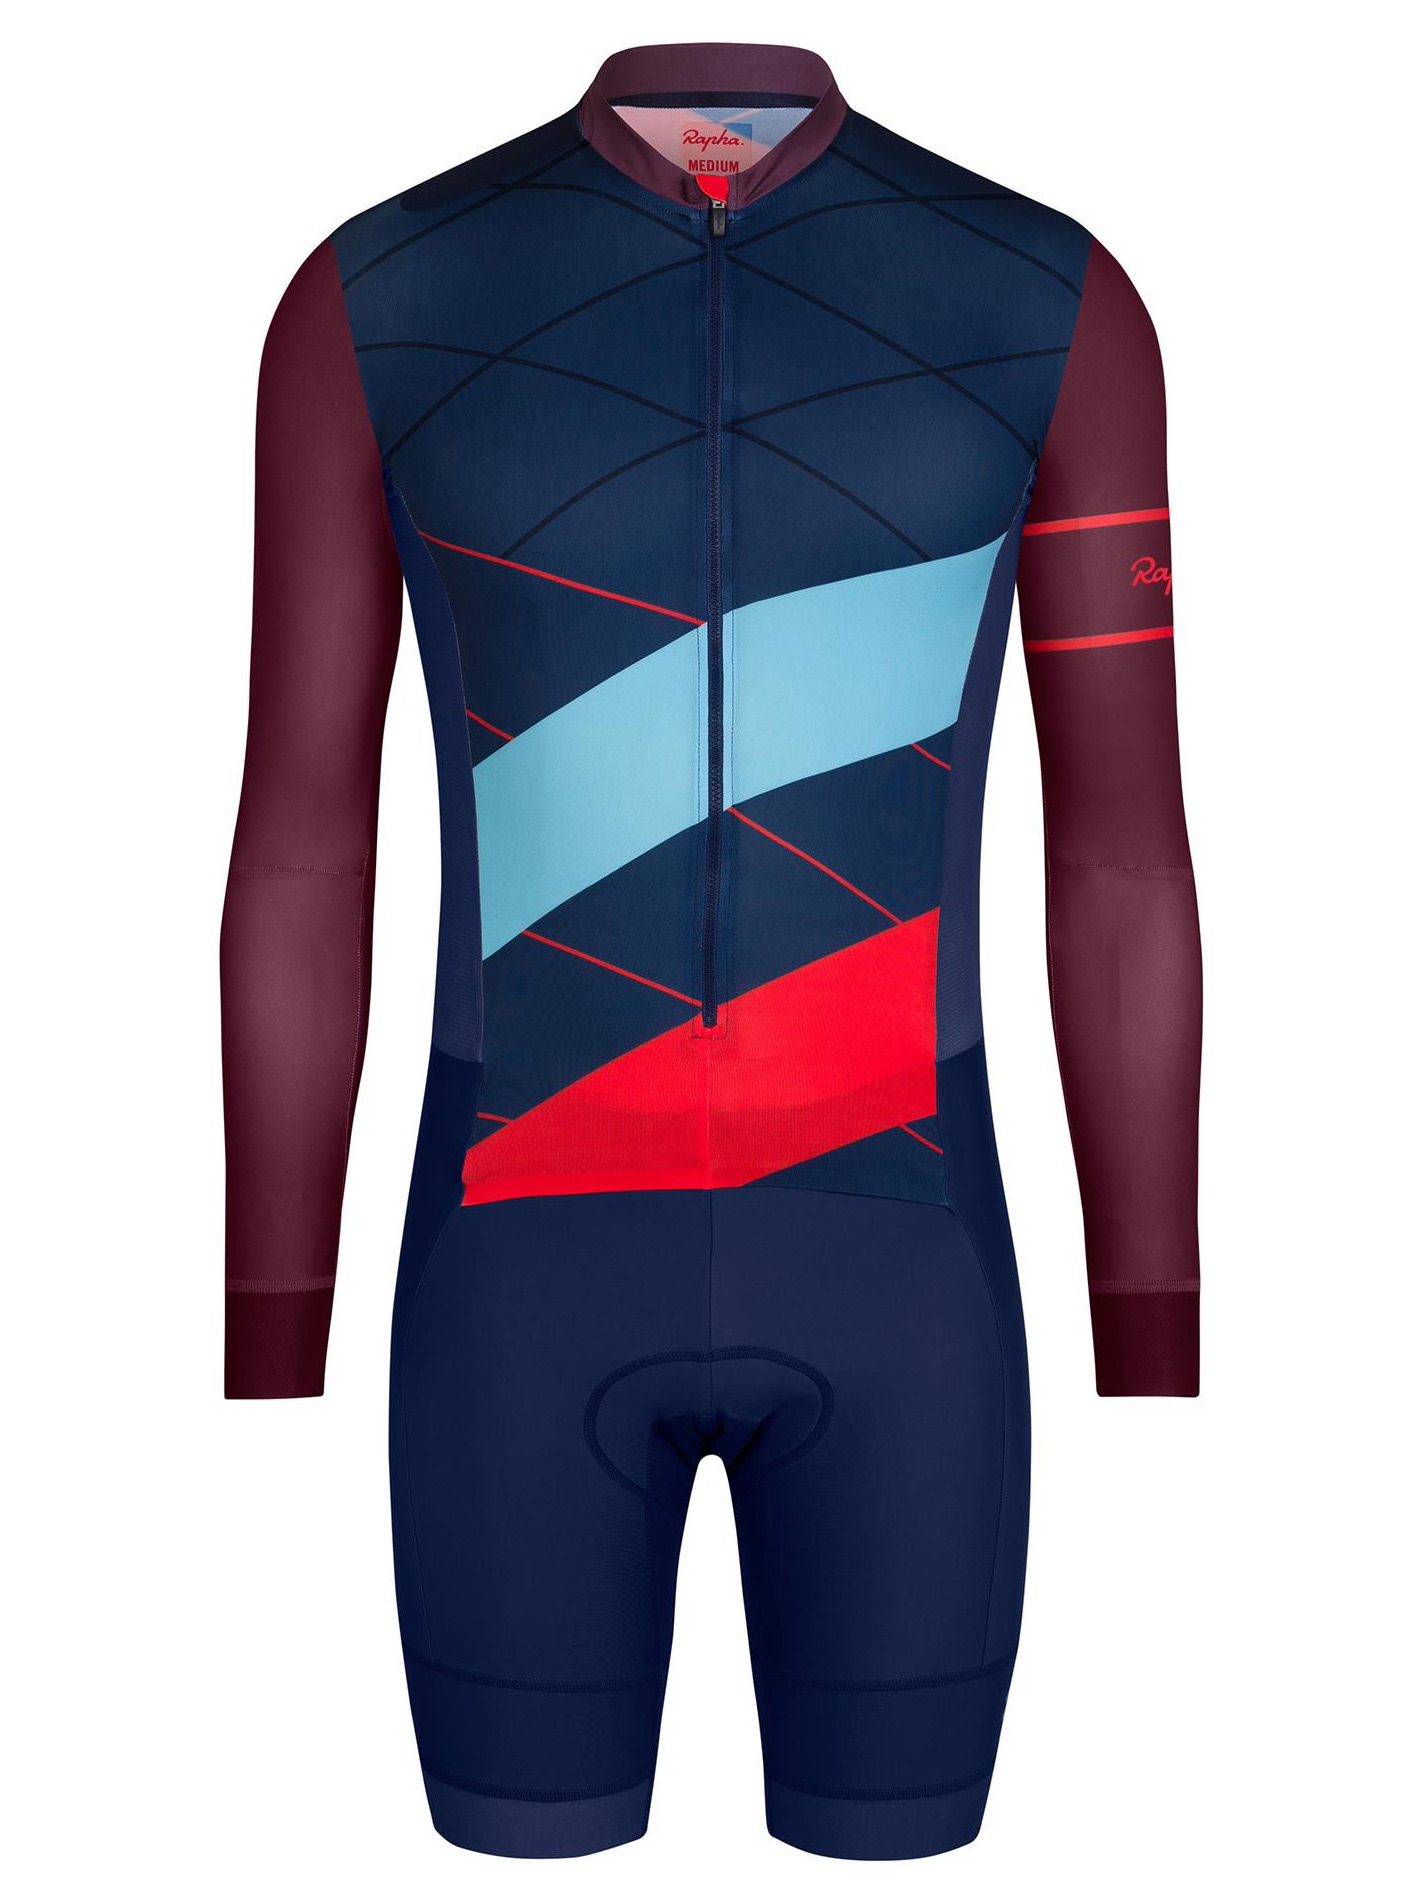 Rapha Knows What is Coming with New Super Cross Livery Skinsuit 